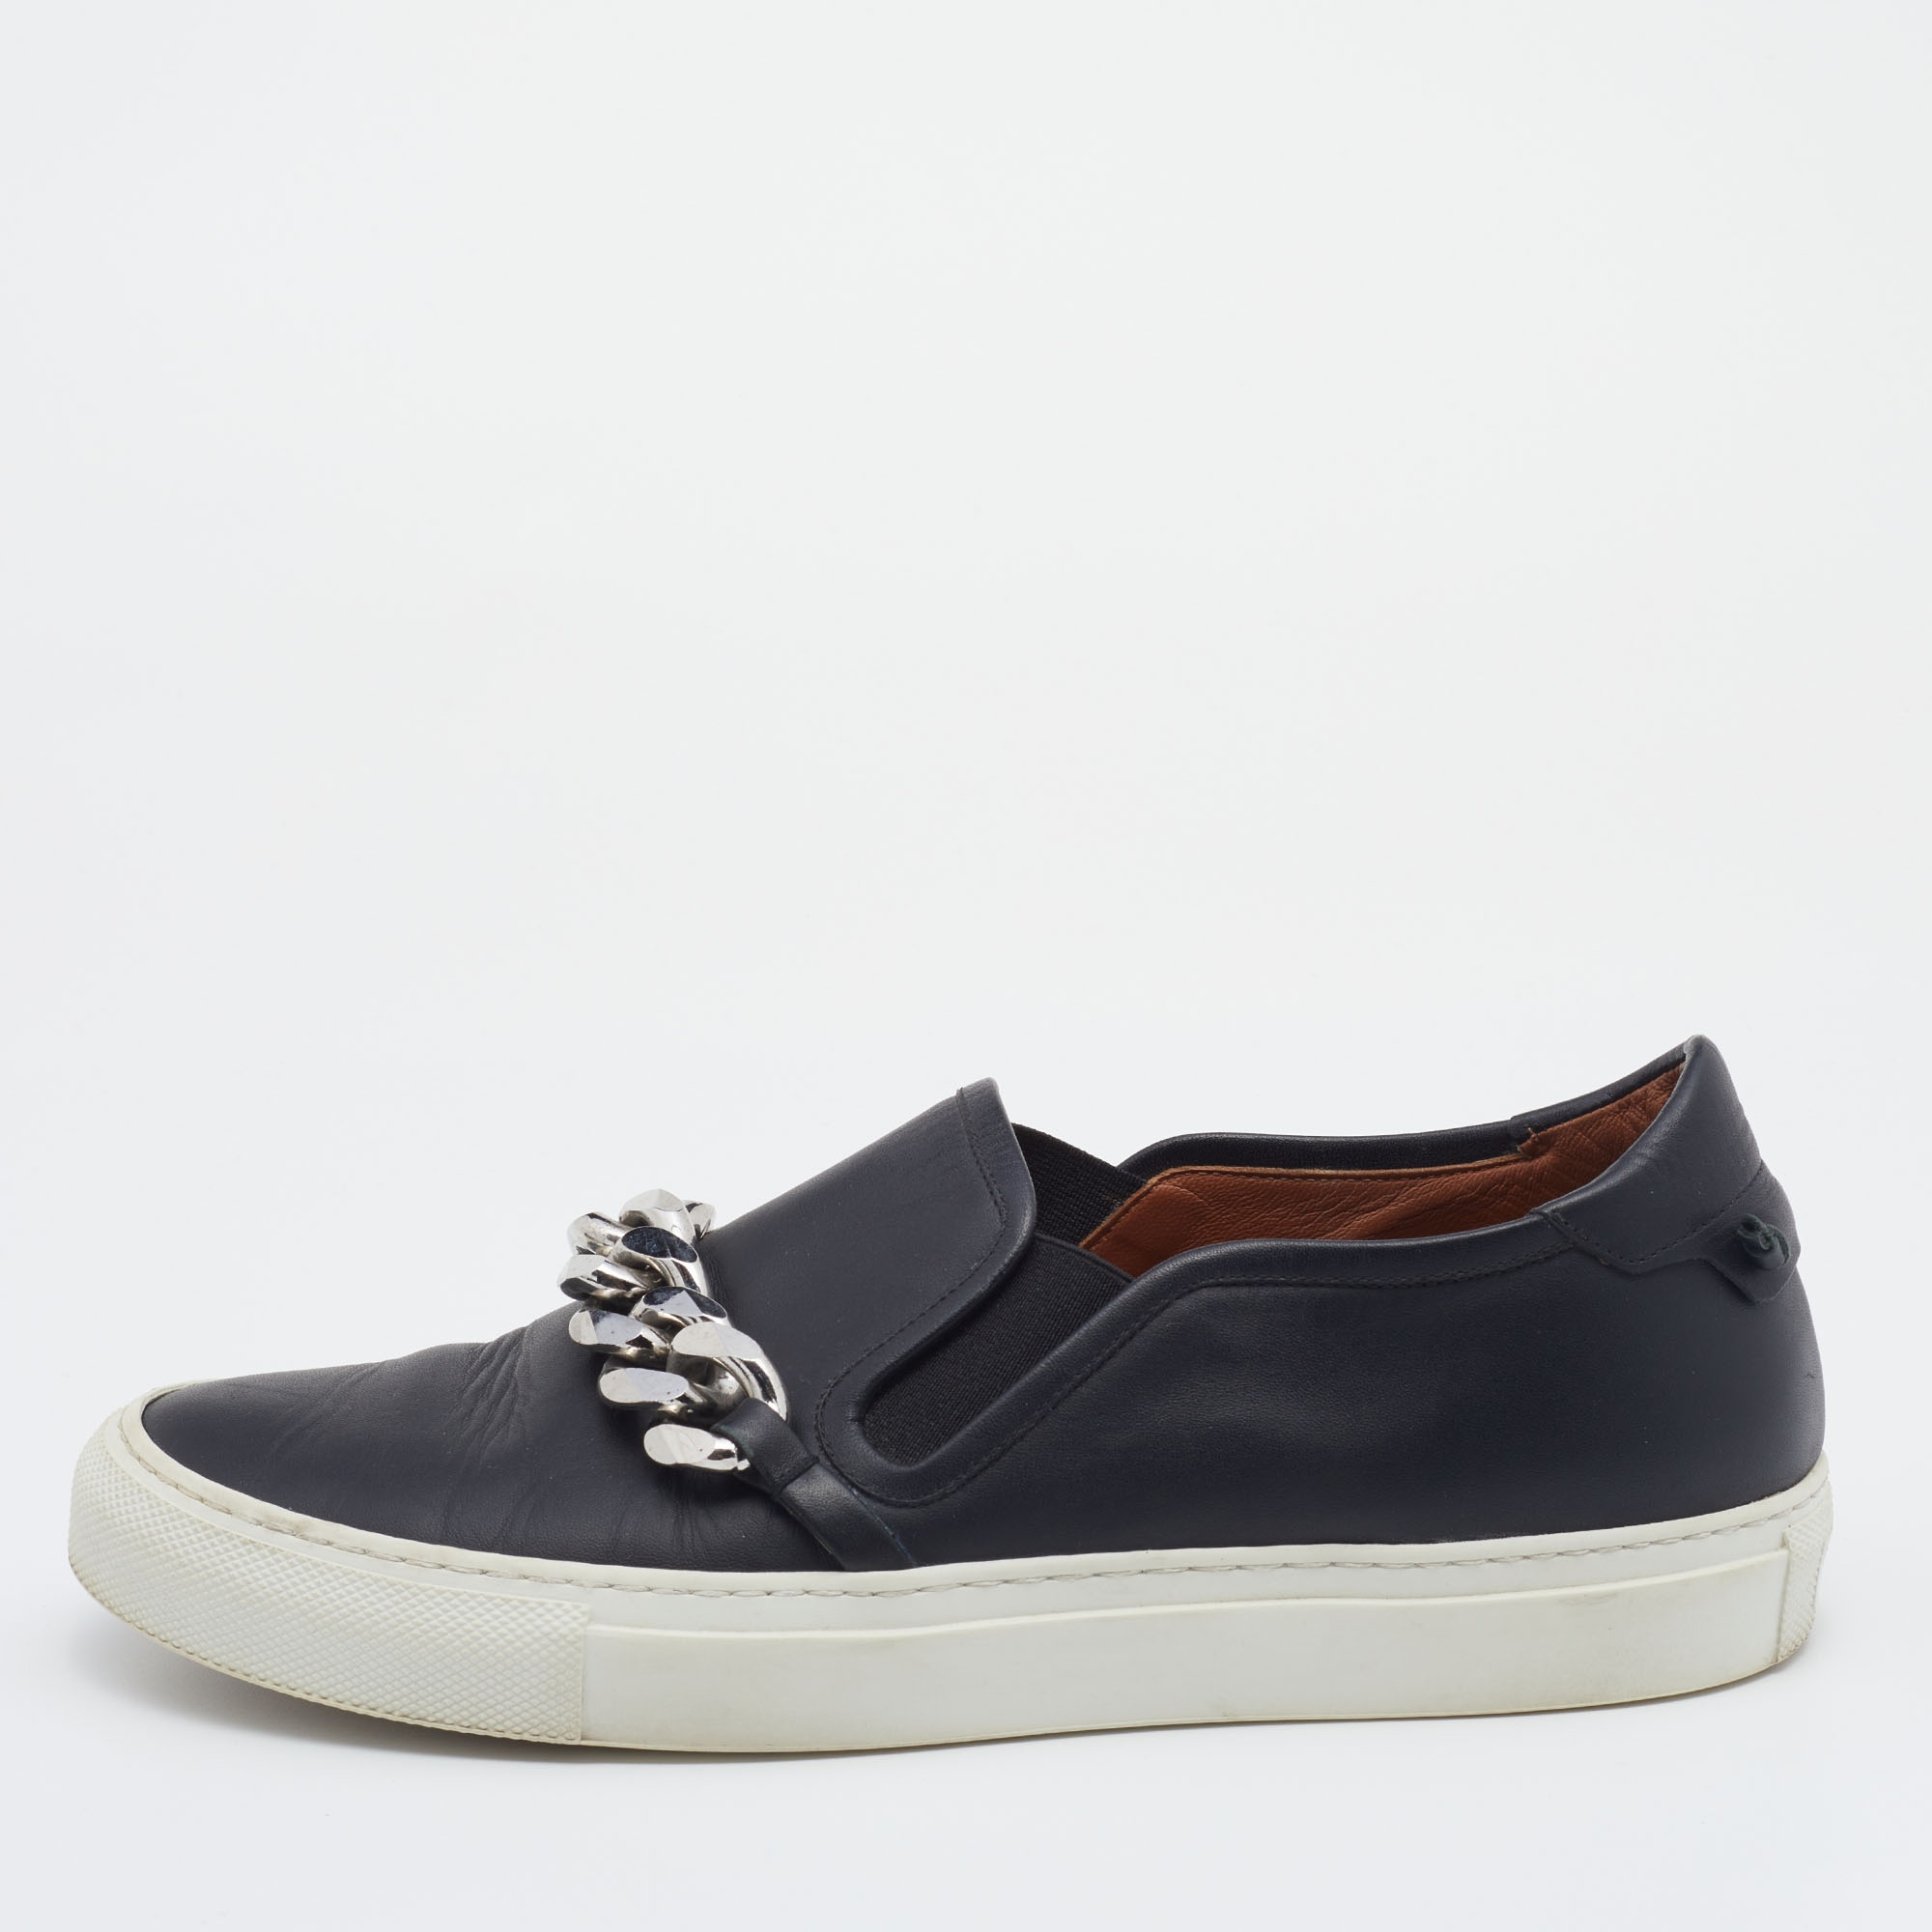 Grant your feet the ultimate comfortable experience with these sneakers from Givenchy They are crafted from black leather with a chain detail embellishing the vamps. They showcase an easy slip on feature. Add these sneakers to your collection and appear stylish every time you wear them.